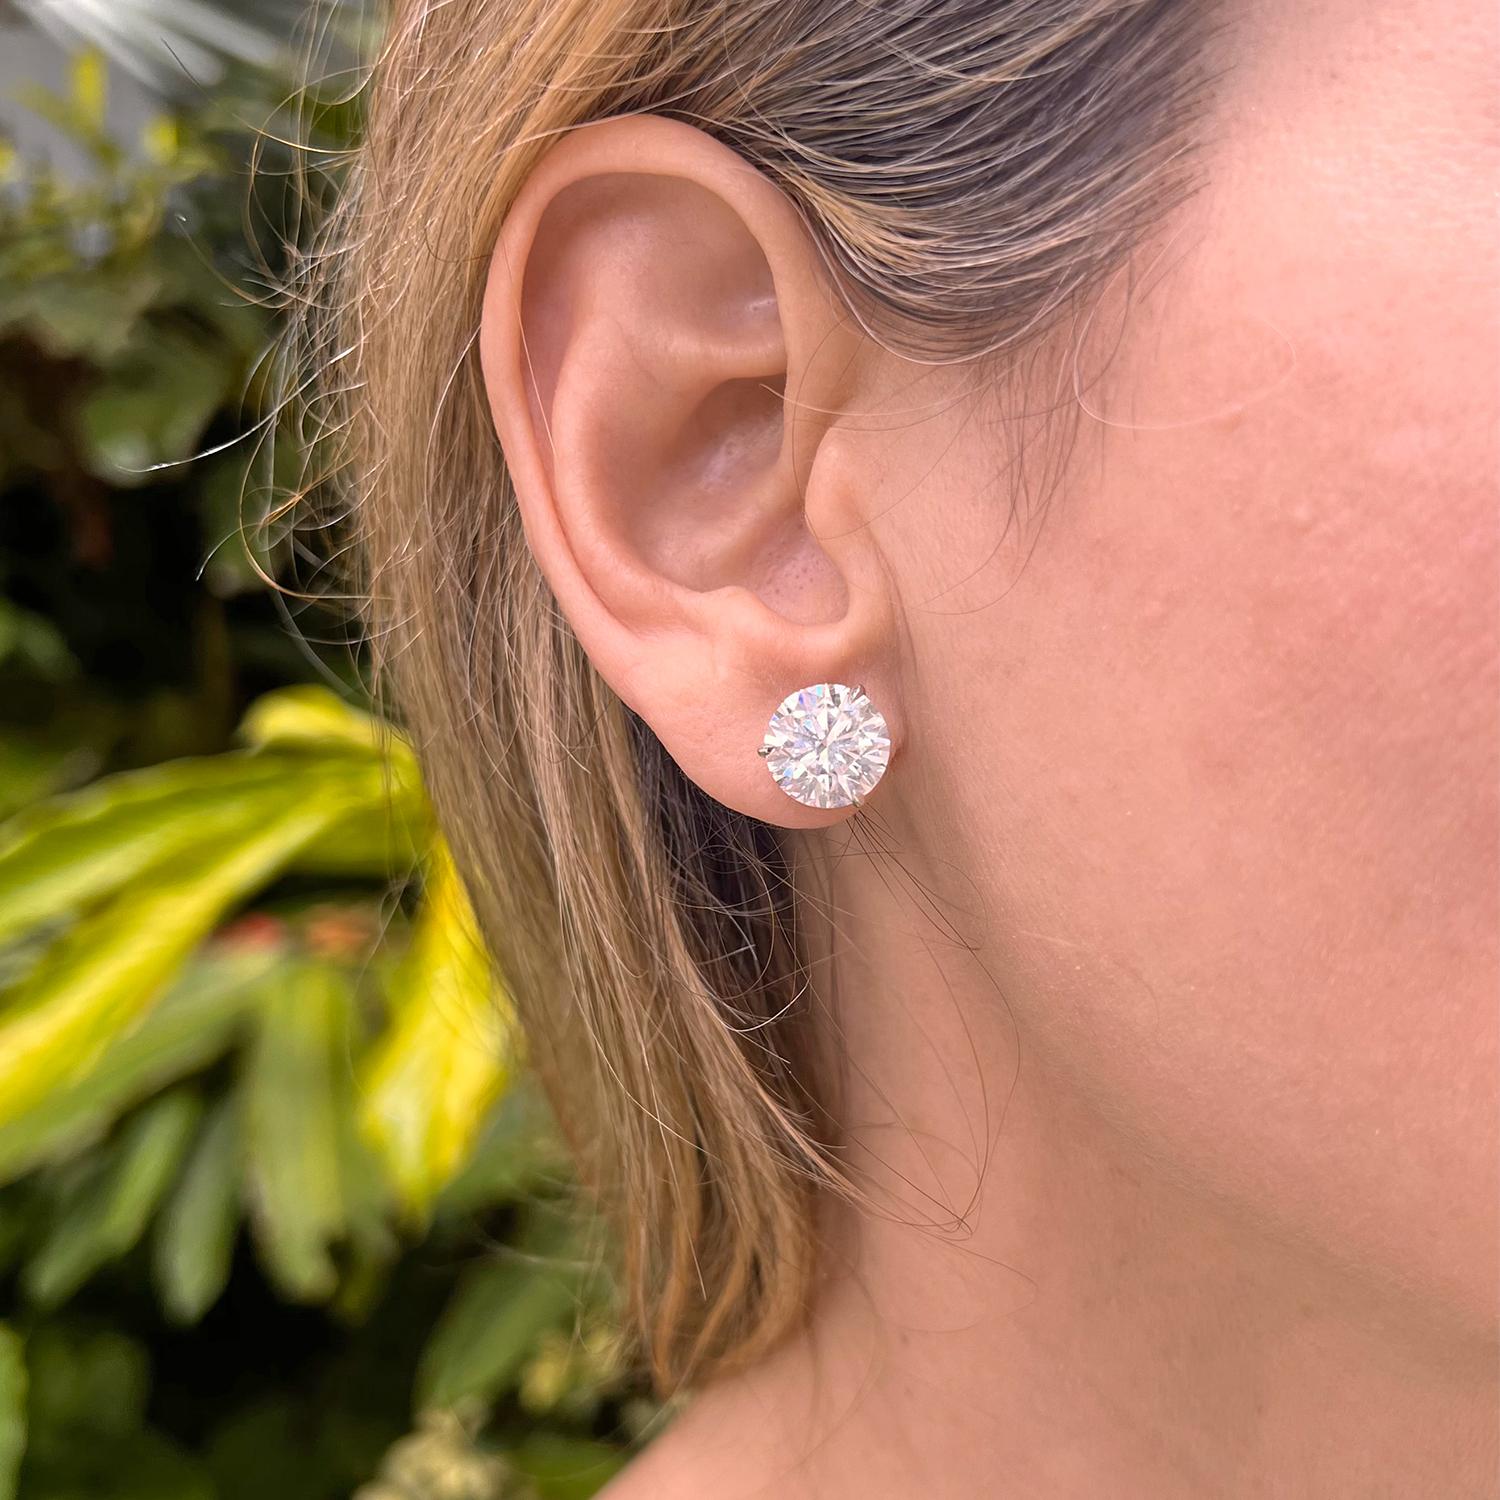 Round brilliant cut diamond stud earrings, showcasing a pair of well-matched colorless diamonds weighing 10.09 total carats, the diamonds secured in three-prong platinum martini settings with posts for pierced ears. Both diamonds are D-color and